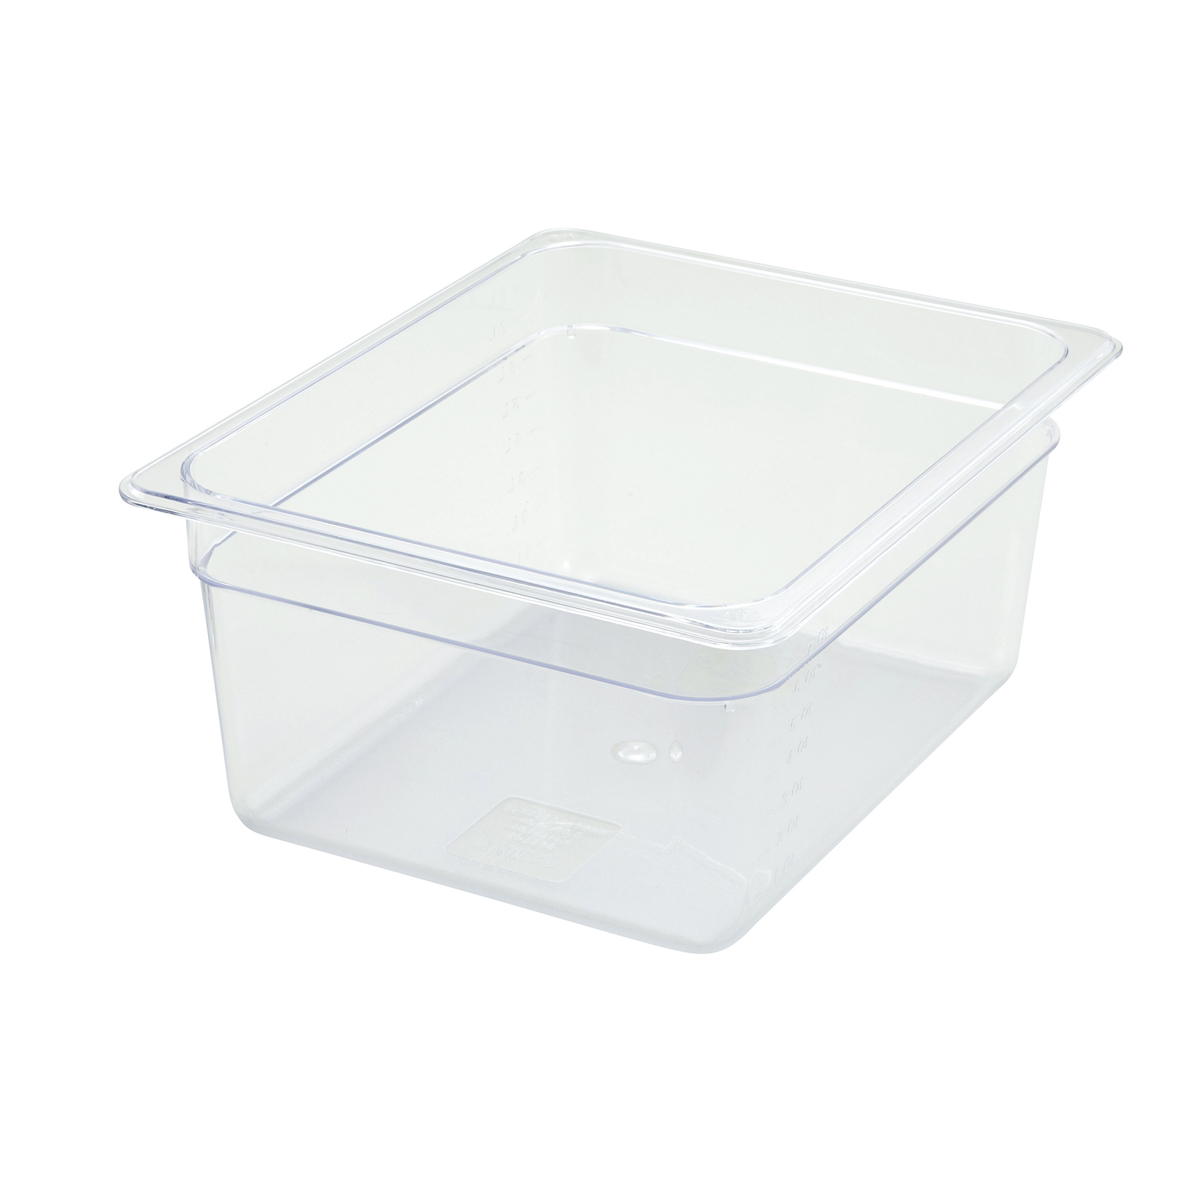 Winco SP7206 Poly-Ware Polycarbonate Half Size Food Pan 5-1/2" High